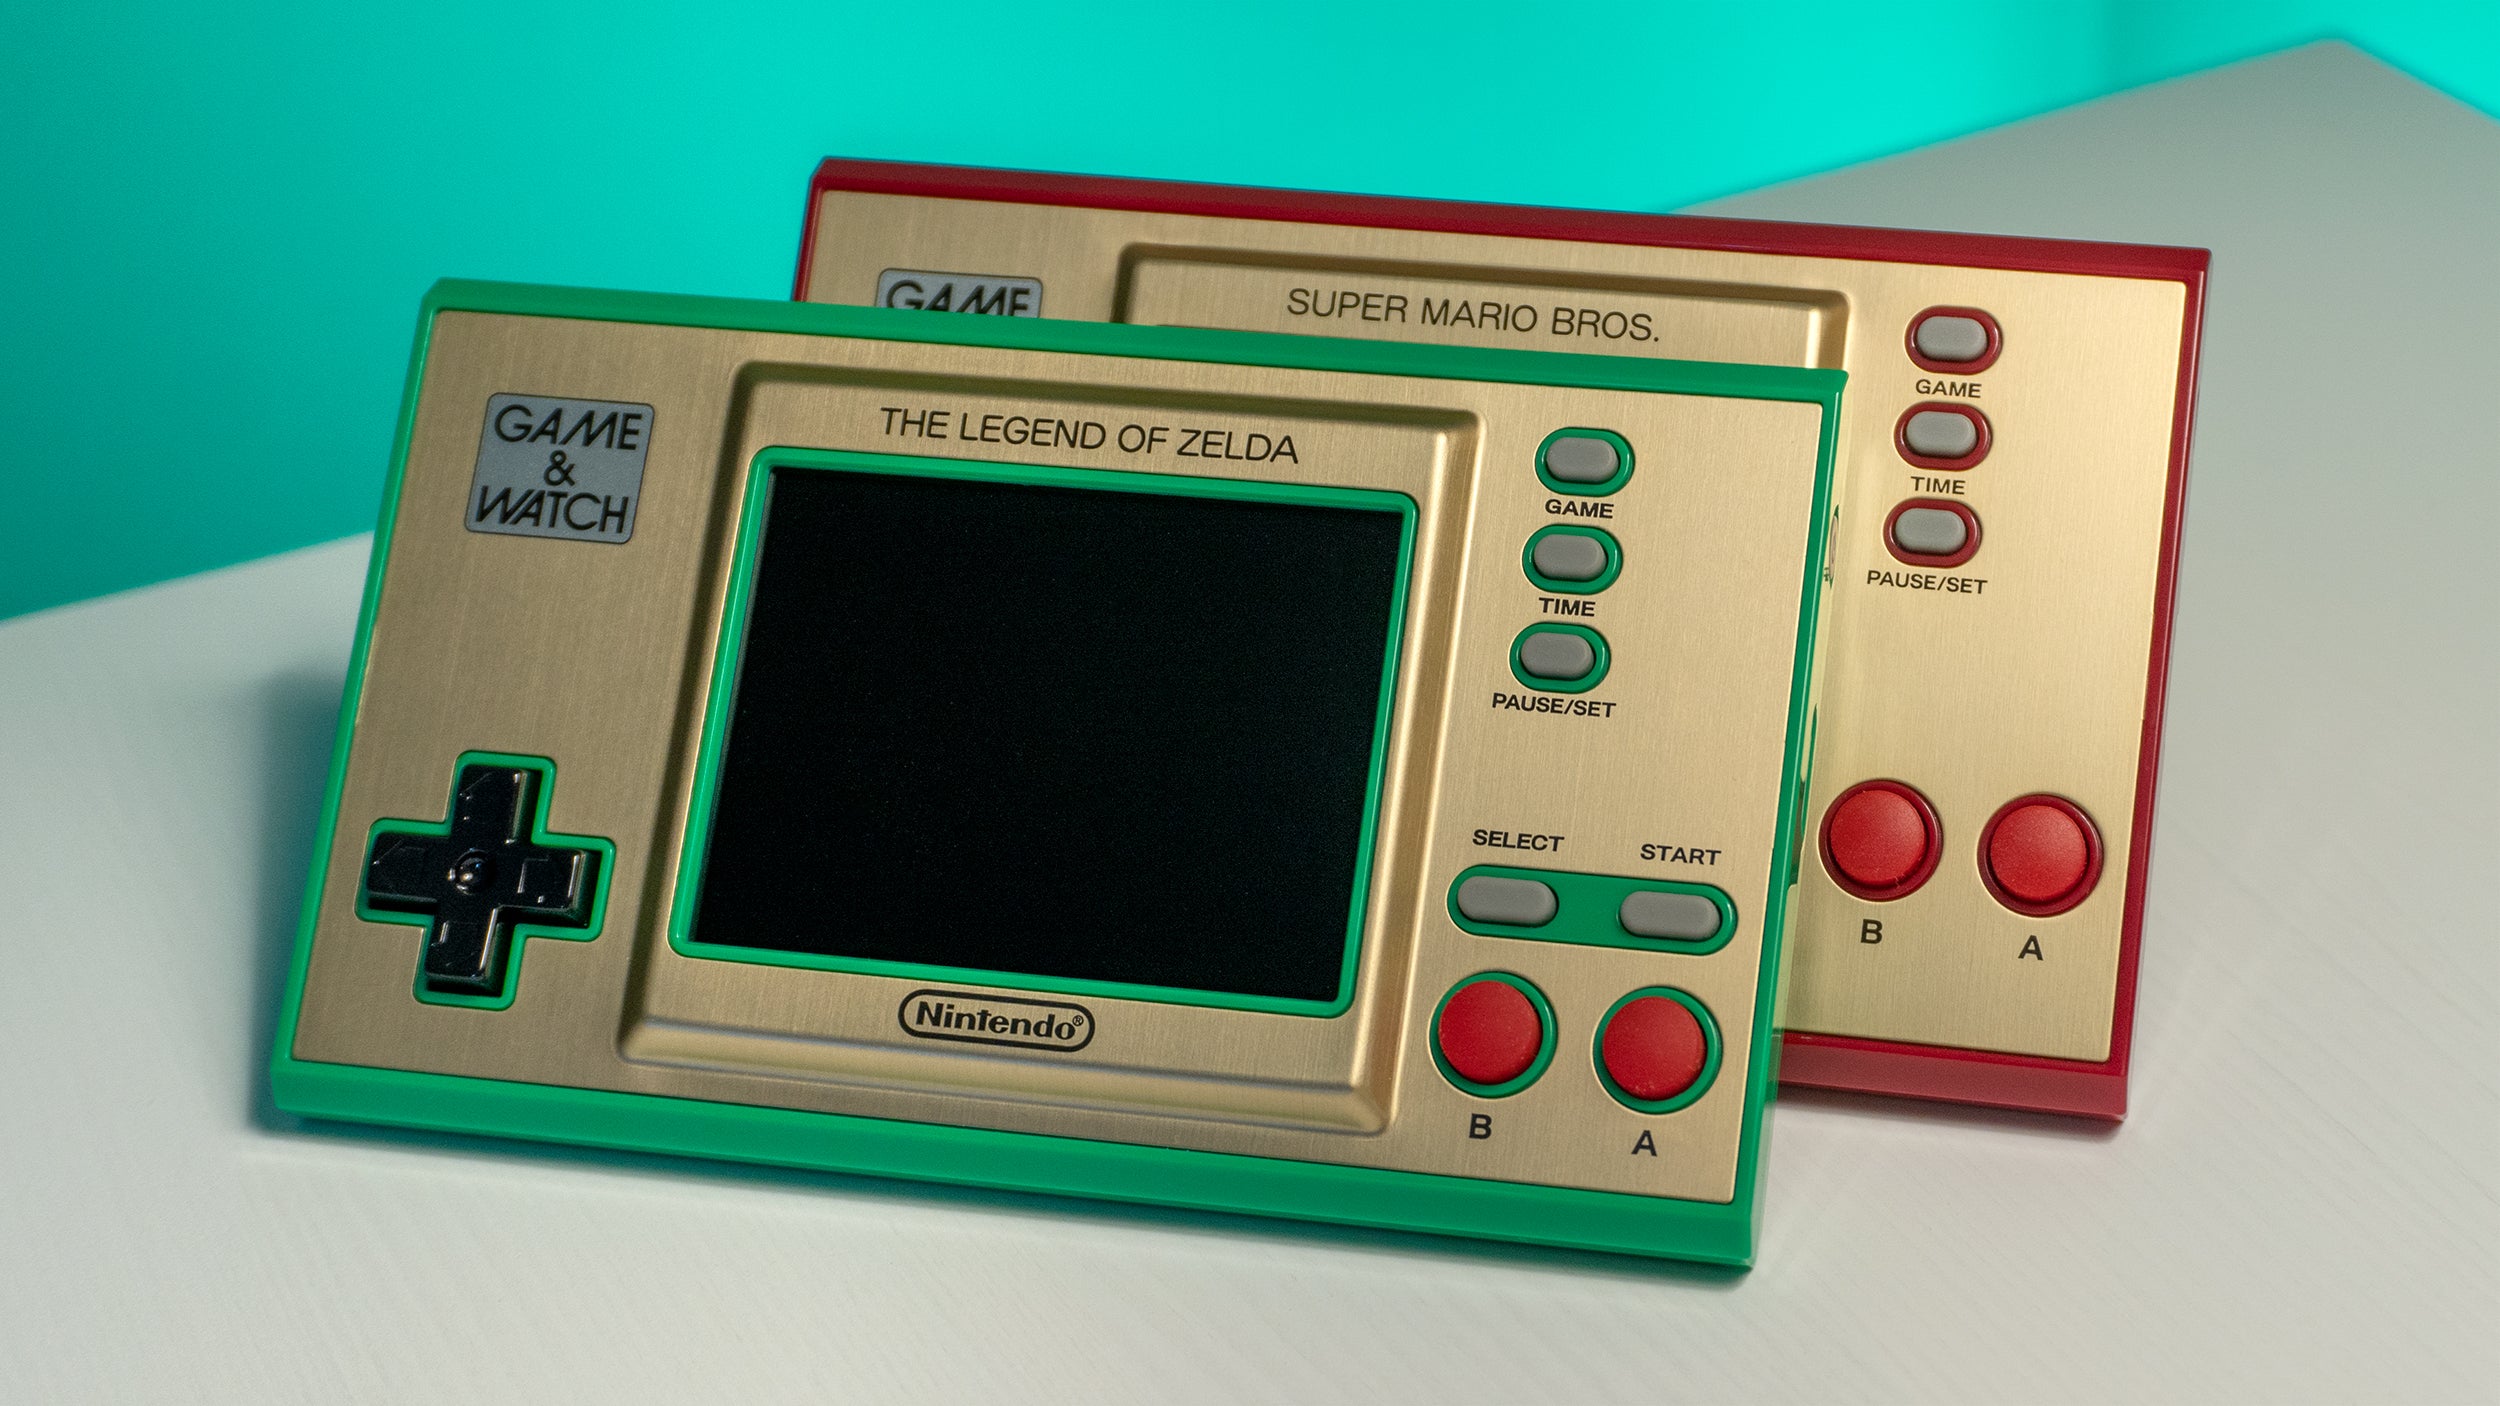 The Game & Watch: The Legend of Zelda adds dedicated Select and Start games which are critical for Zelda gameplay. (Photo: Andrew Liszewski - Gizmodo)